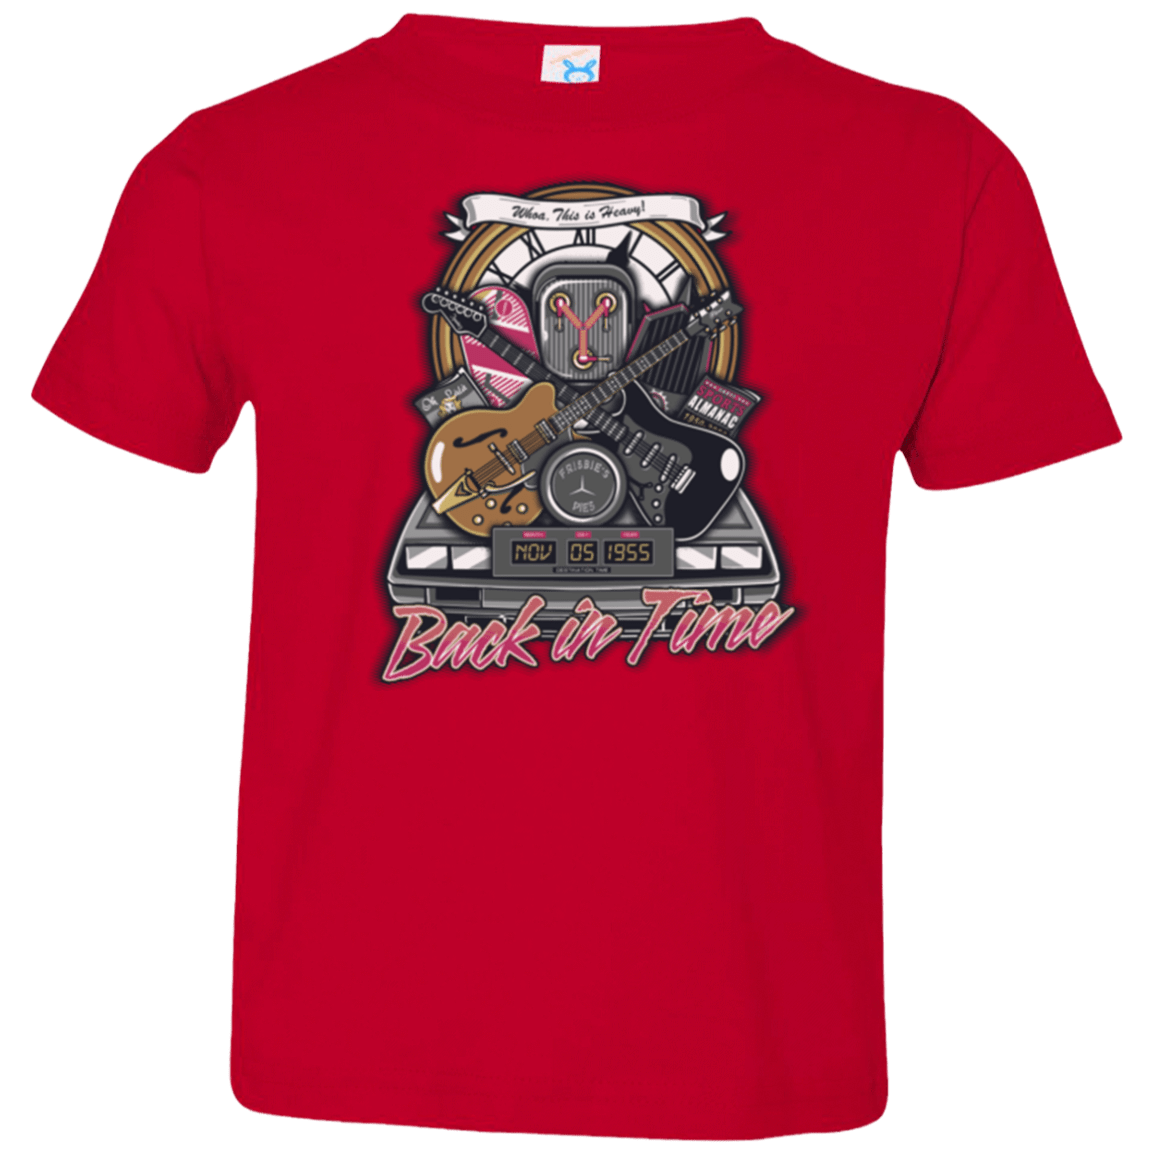 T-Shirts Red / 2T Back in time Toddler Premium T-Shirt